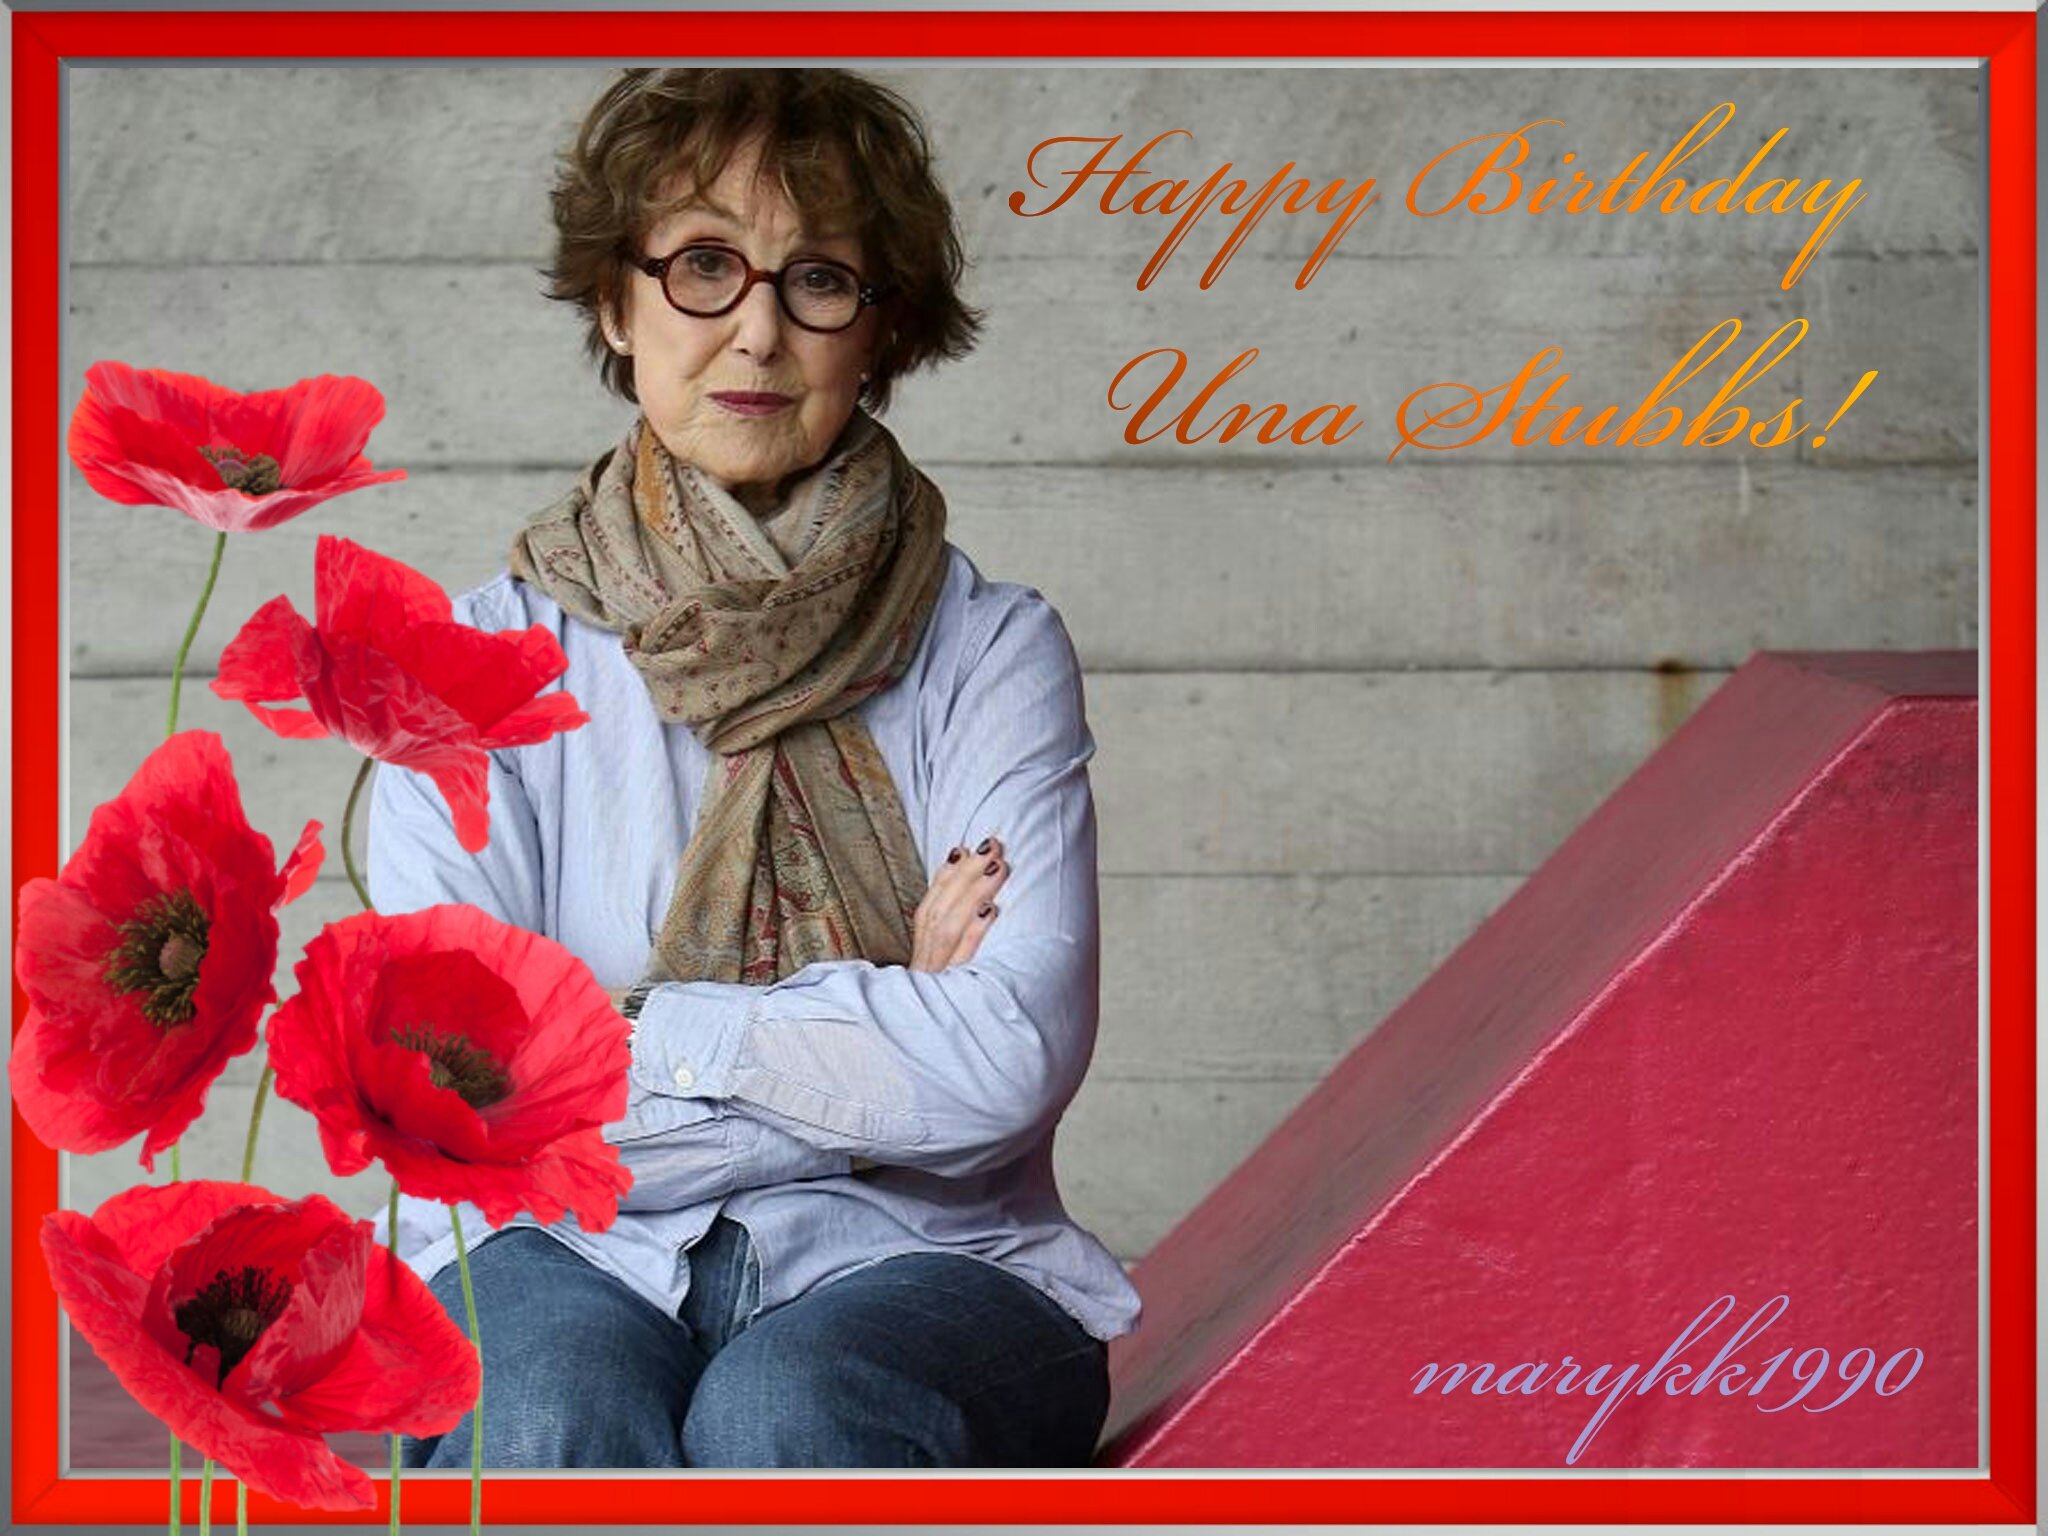 To our amazing and wonderful Mrs. Hudson,  Una Stubbs! Happy Birthday! I hope it was perfect!   